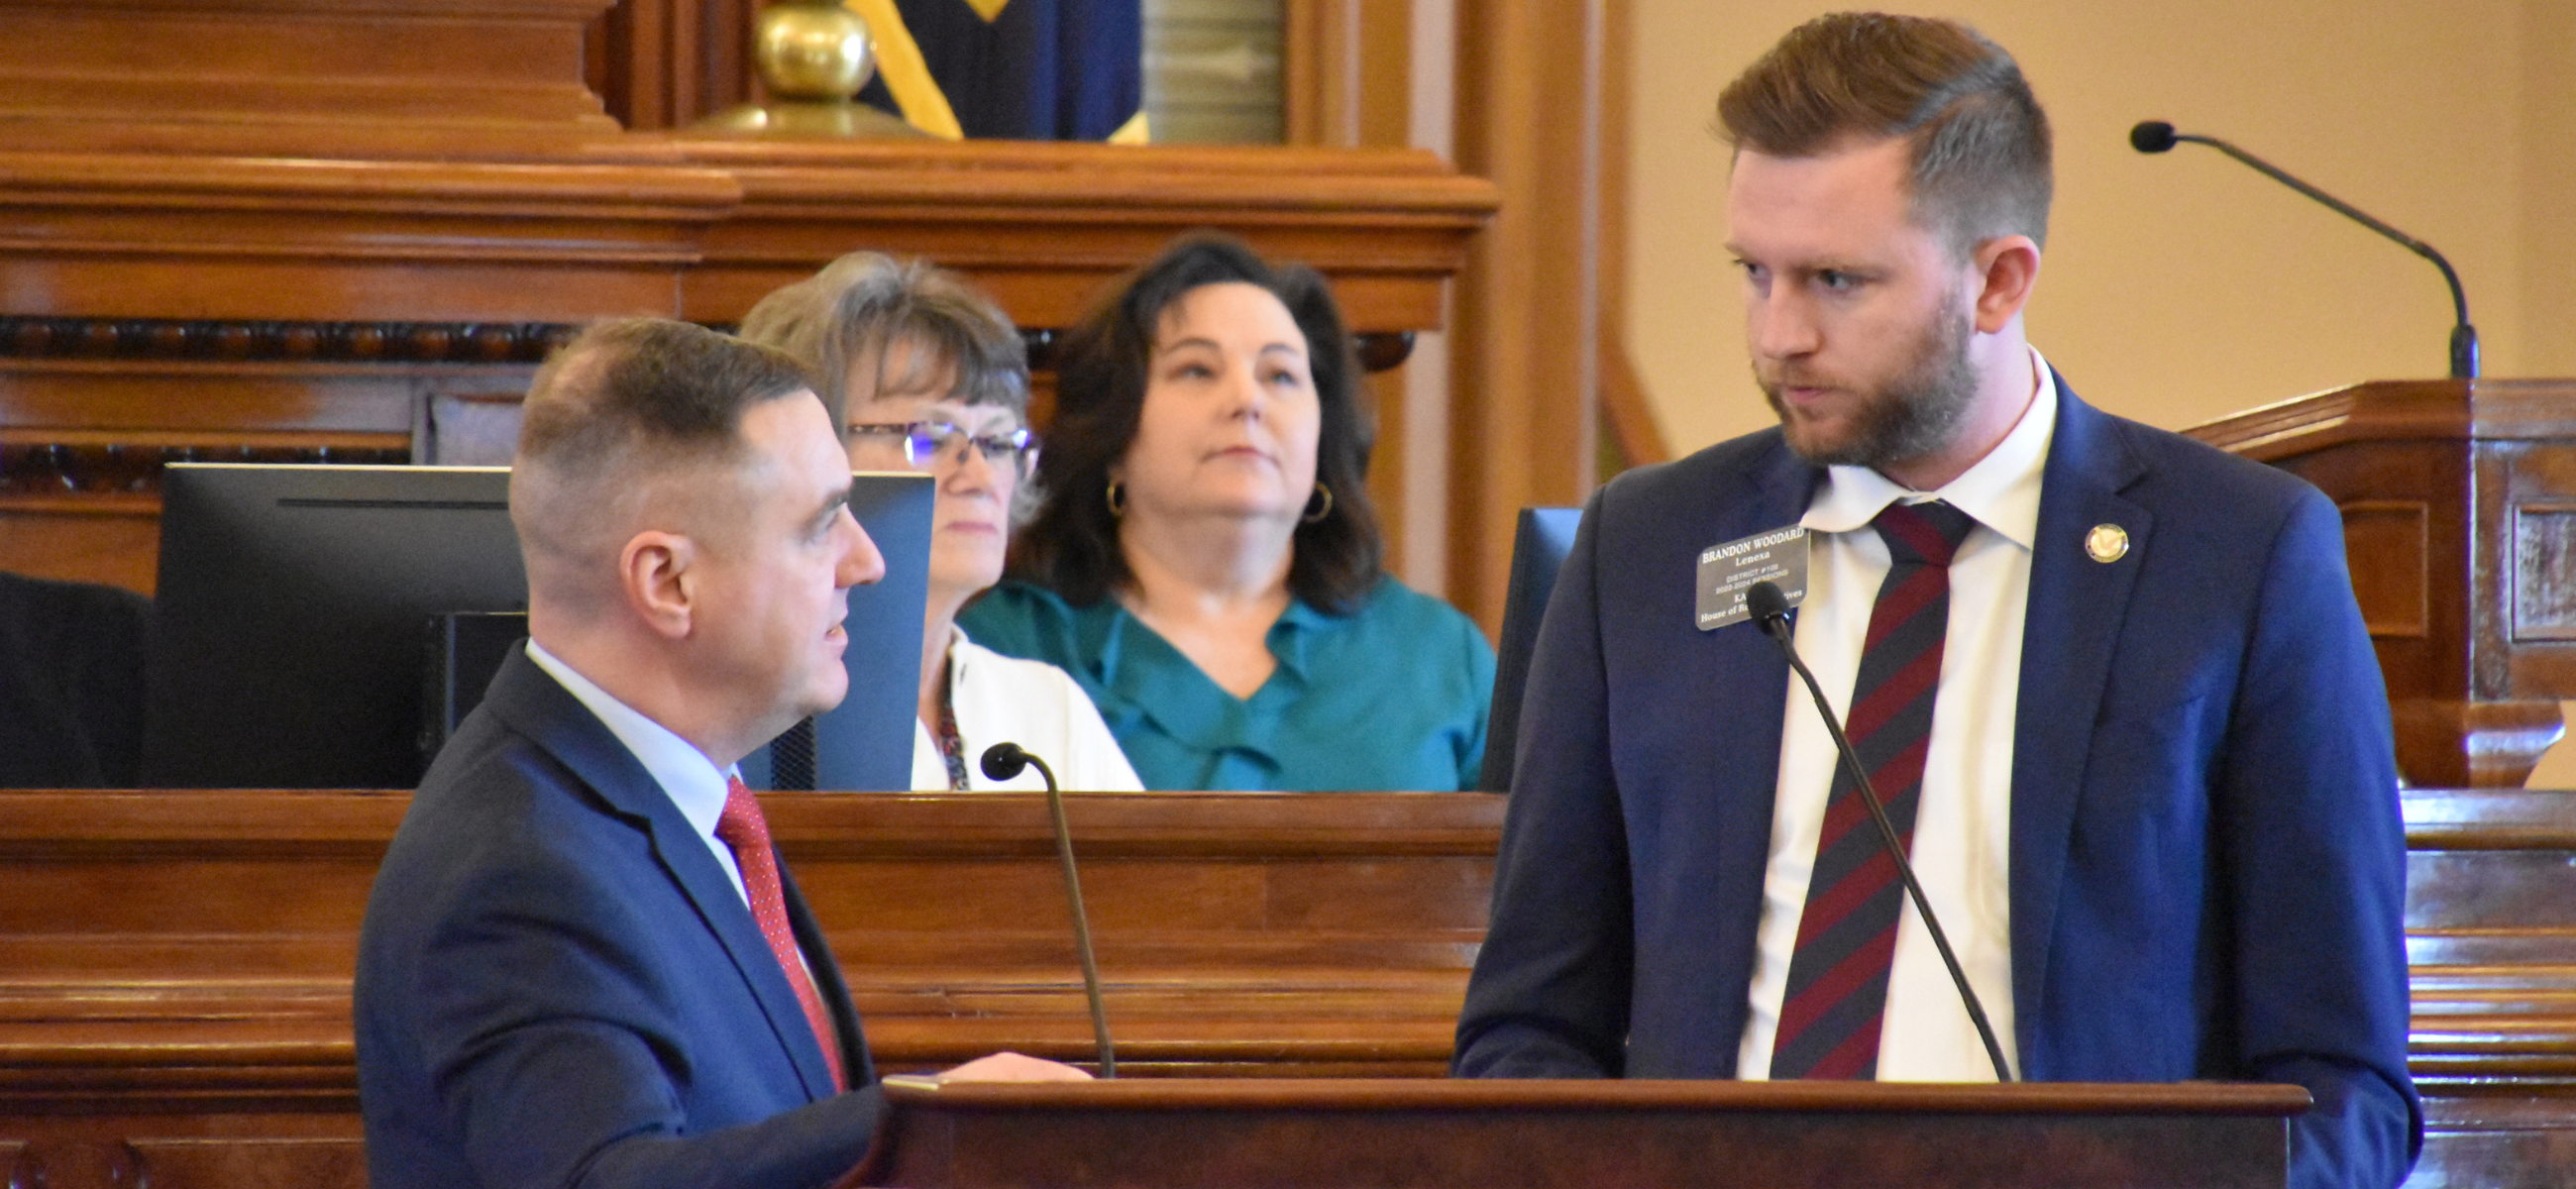 Rep. Pat Proctor, left, answers a question from Rep. Brandon Woodard during a Feb. 21 House floor session.